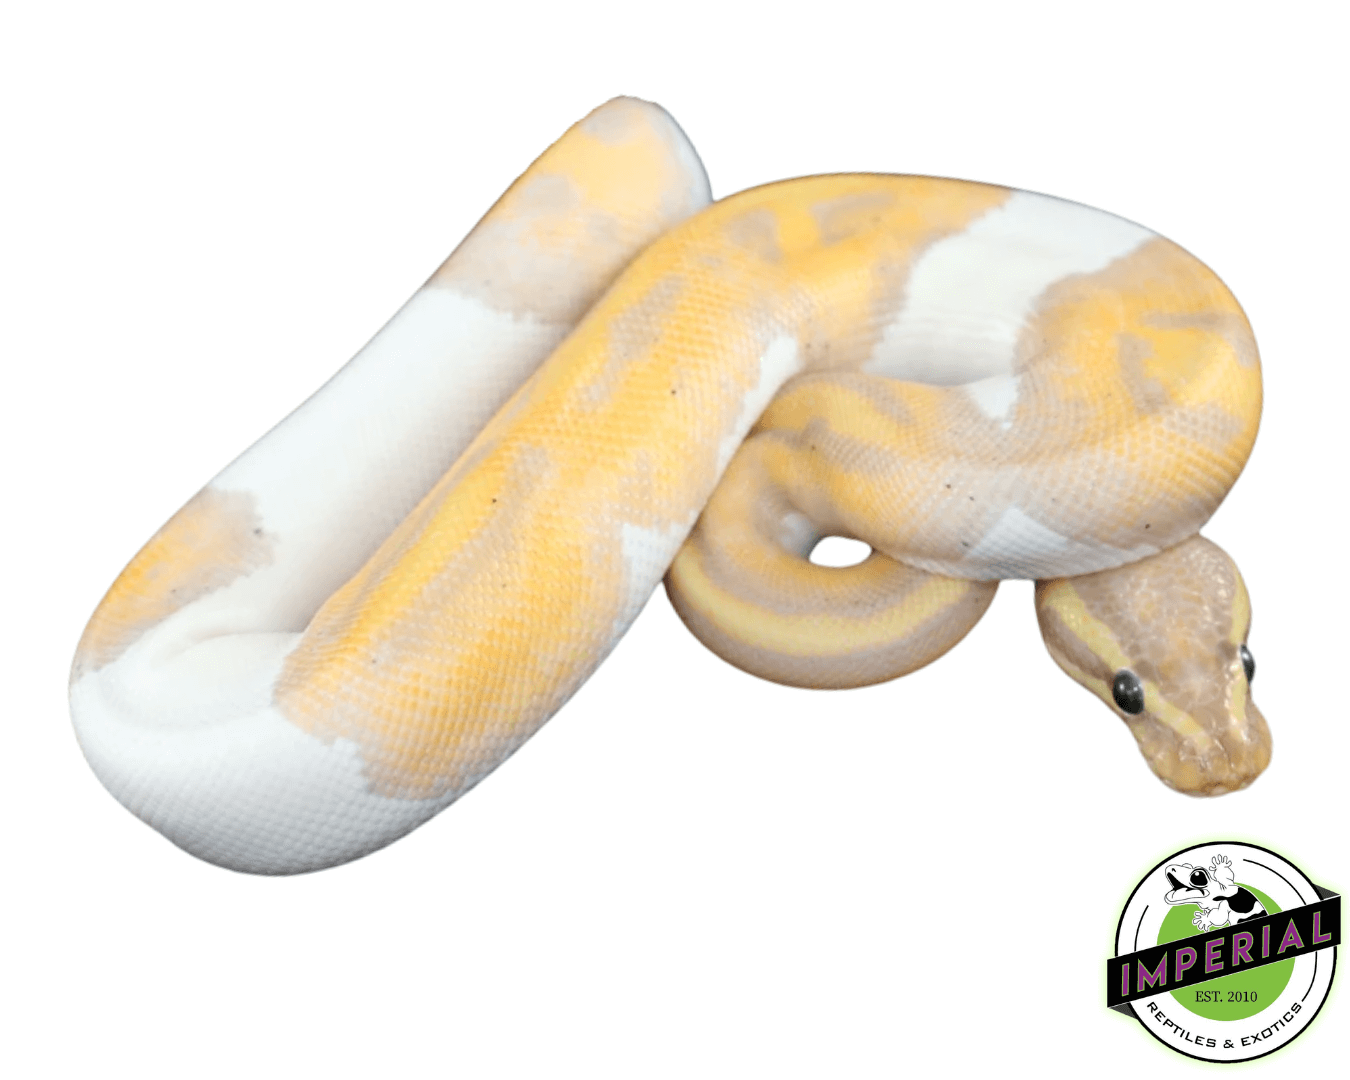 banana pied ball python for sale, buy reptiles online